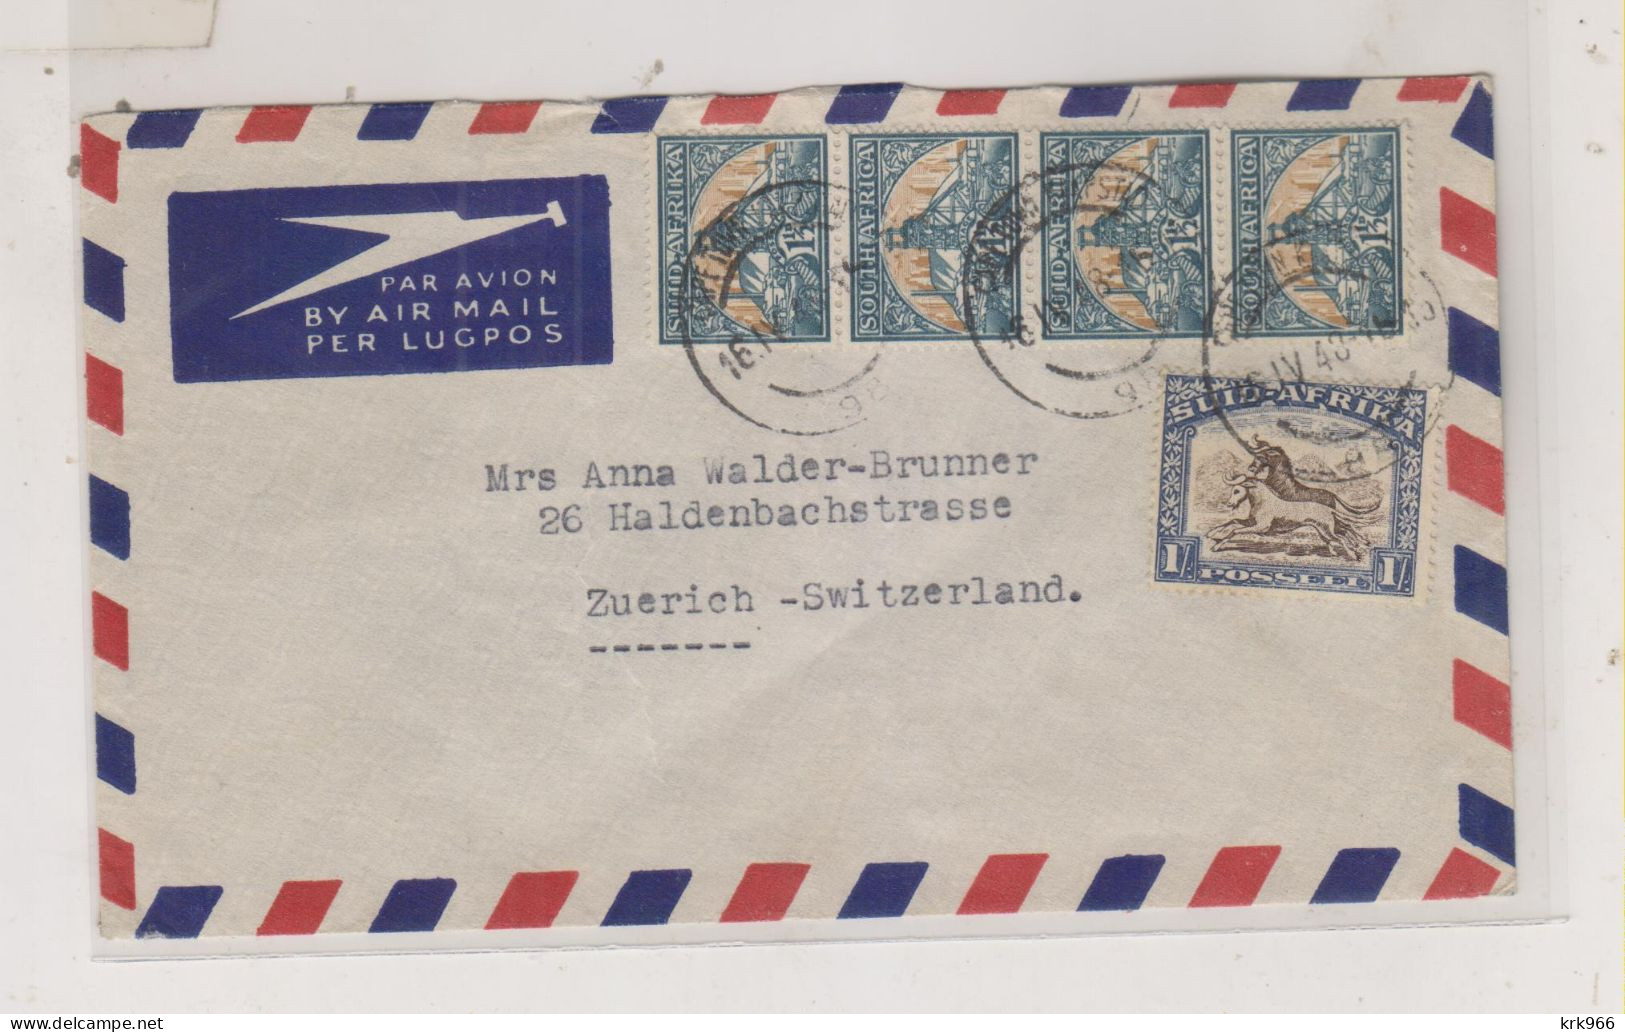 SOUTH AFRICA 1948 CAPE TOWN Nice  Airmail Cover To Switzerland - Posta Aerea